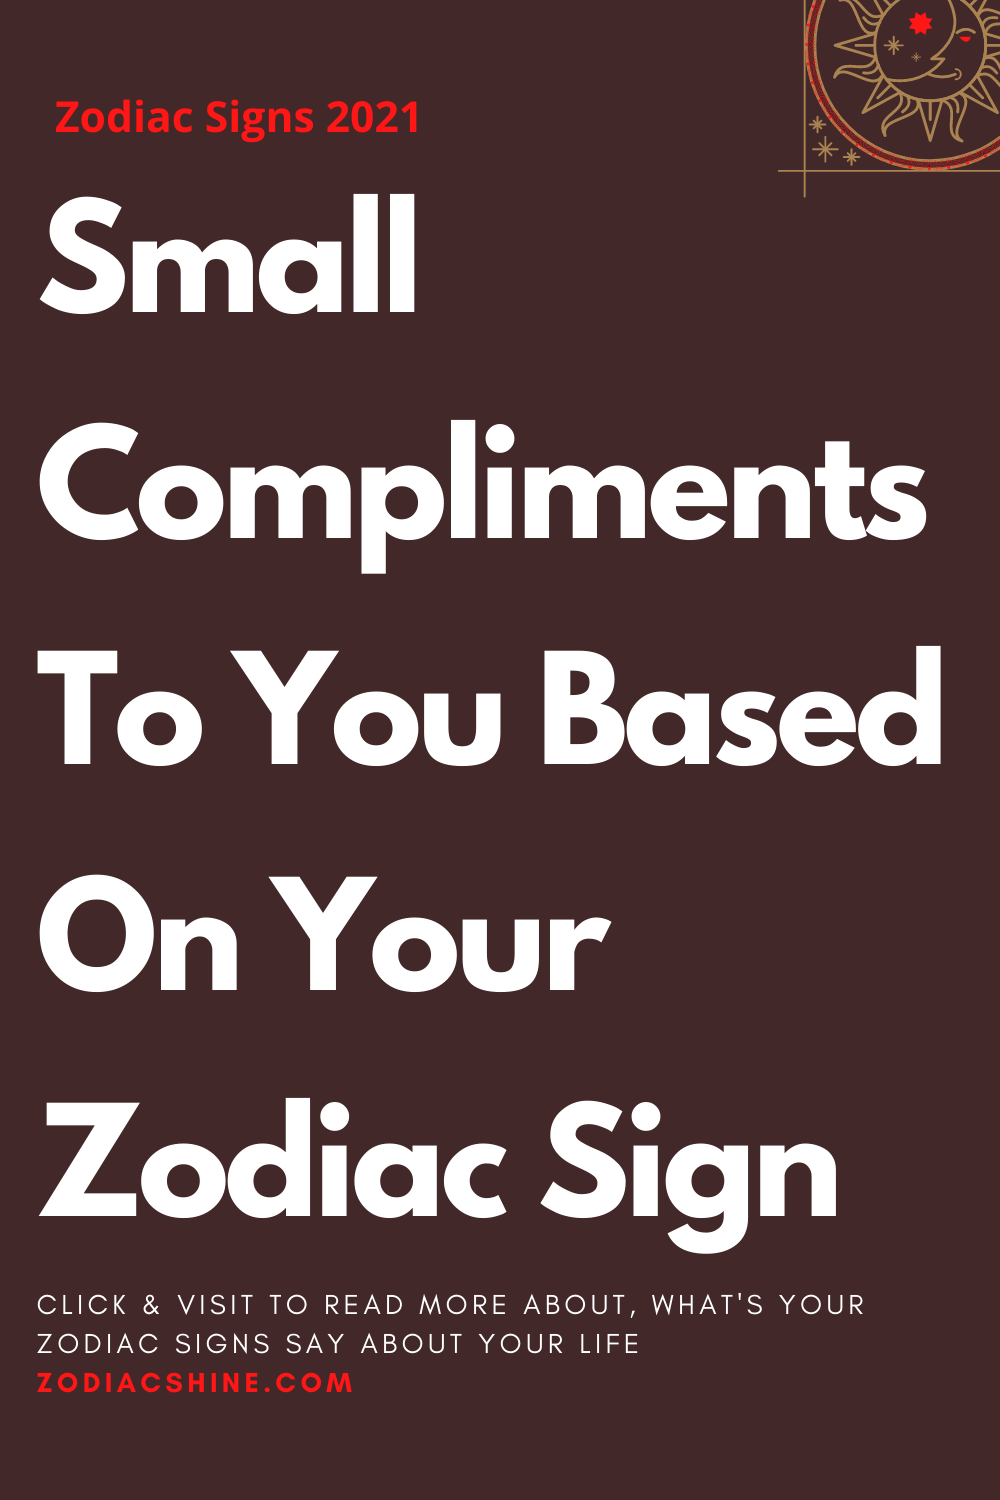 Small Compliments To You Based On Your Zodiac Sign